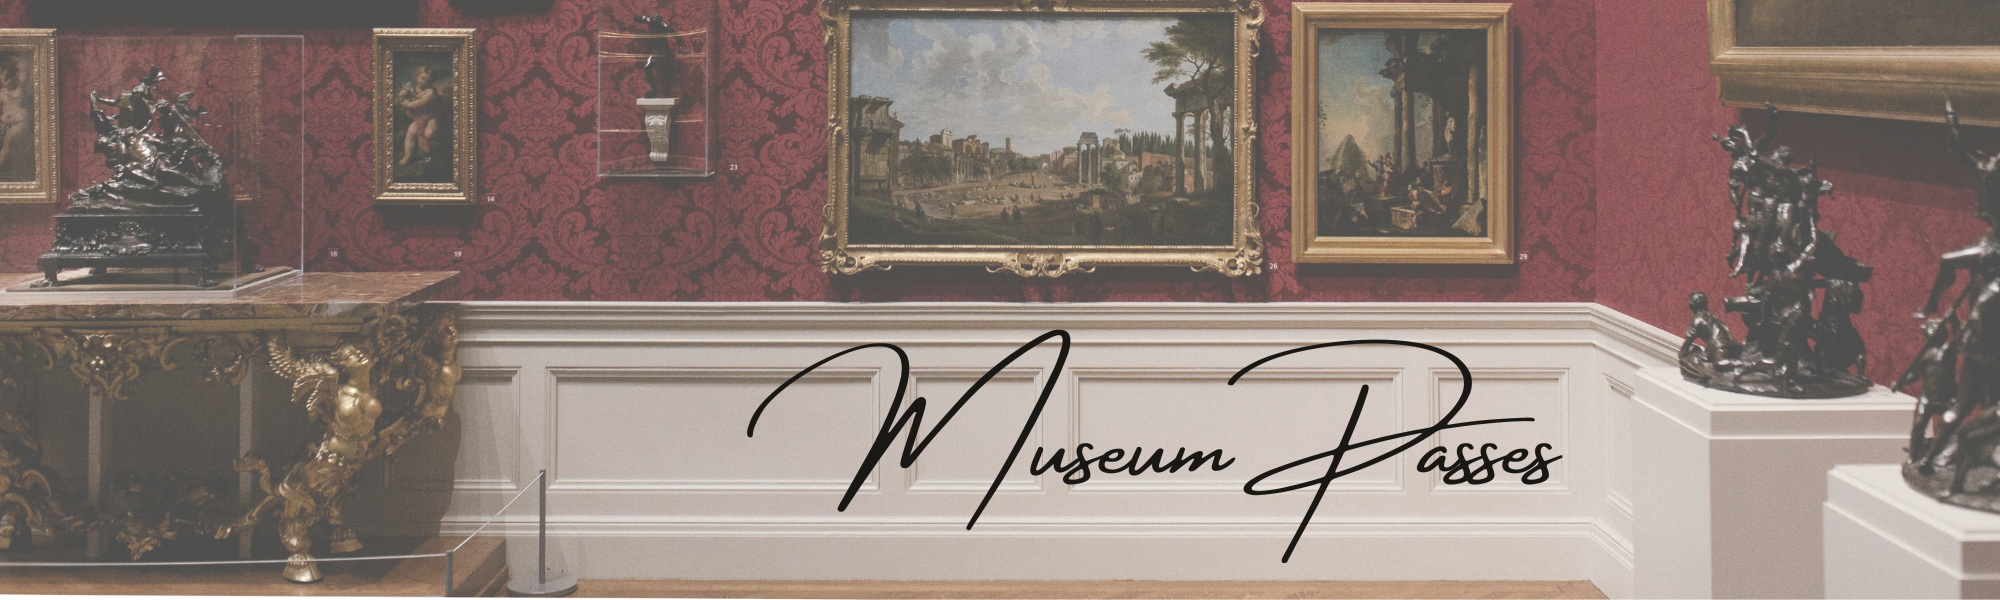 A banner with an image of a museum gallery and the words "Museum Passes"